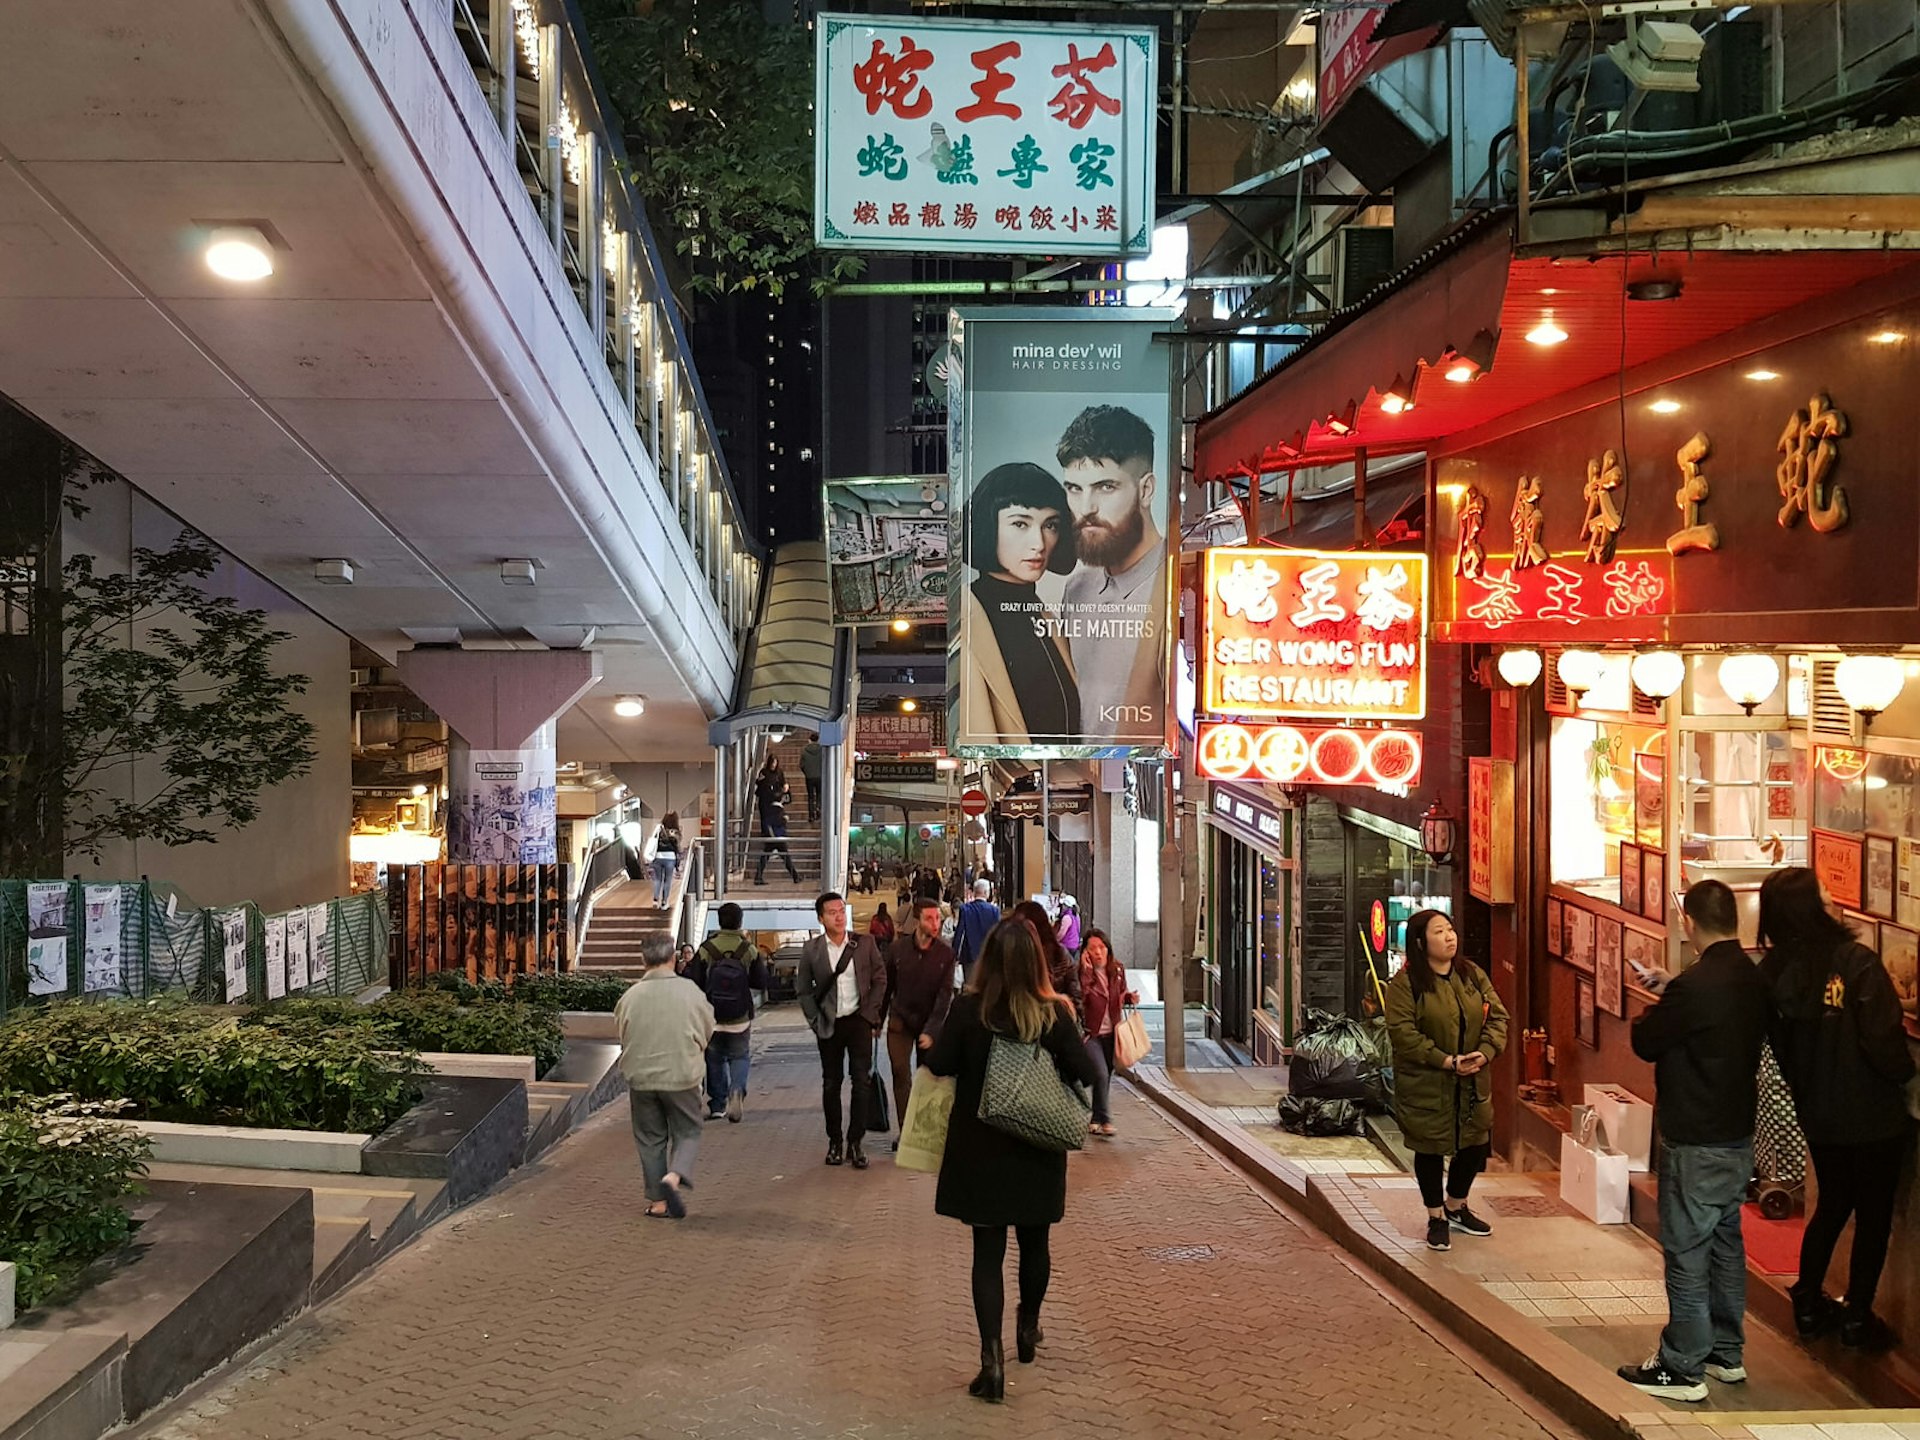 People walk down a pedestrian street lit on one side by traditional shops, with the escalator overpass above to the left.